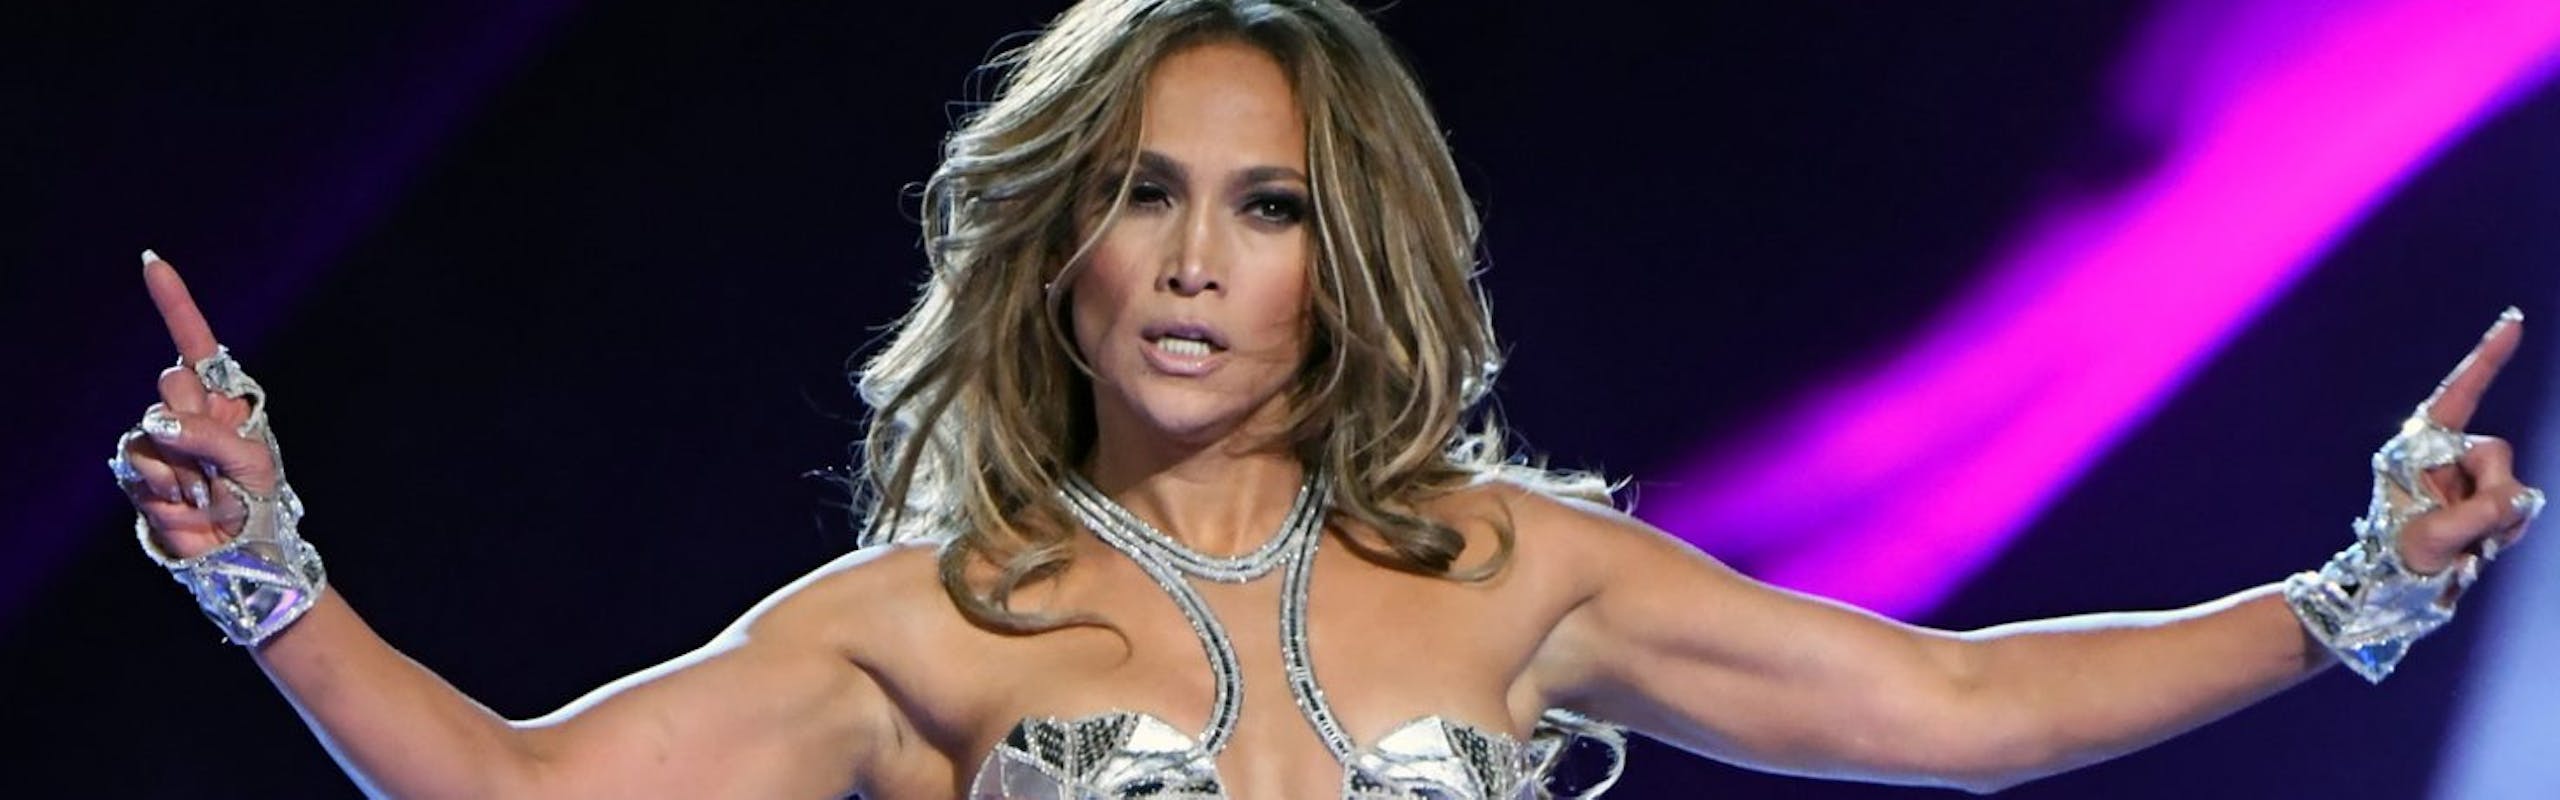 Jennifer Lopez wears silver jewel catsuit while performing at the 2022 Superbowl Halftime Show.